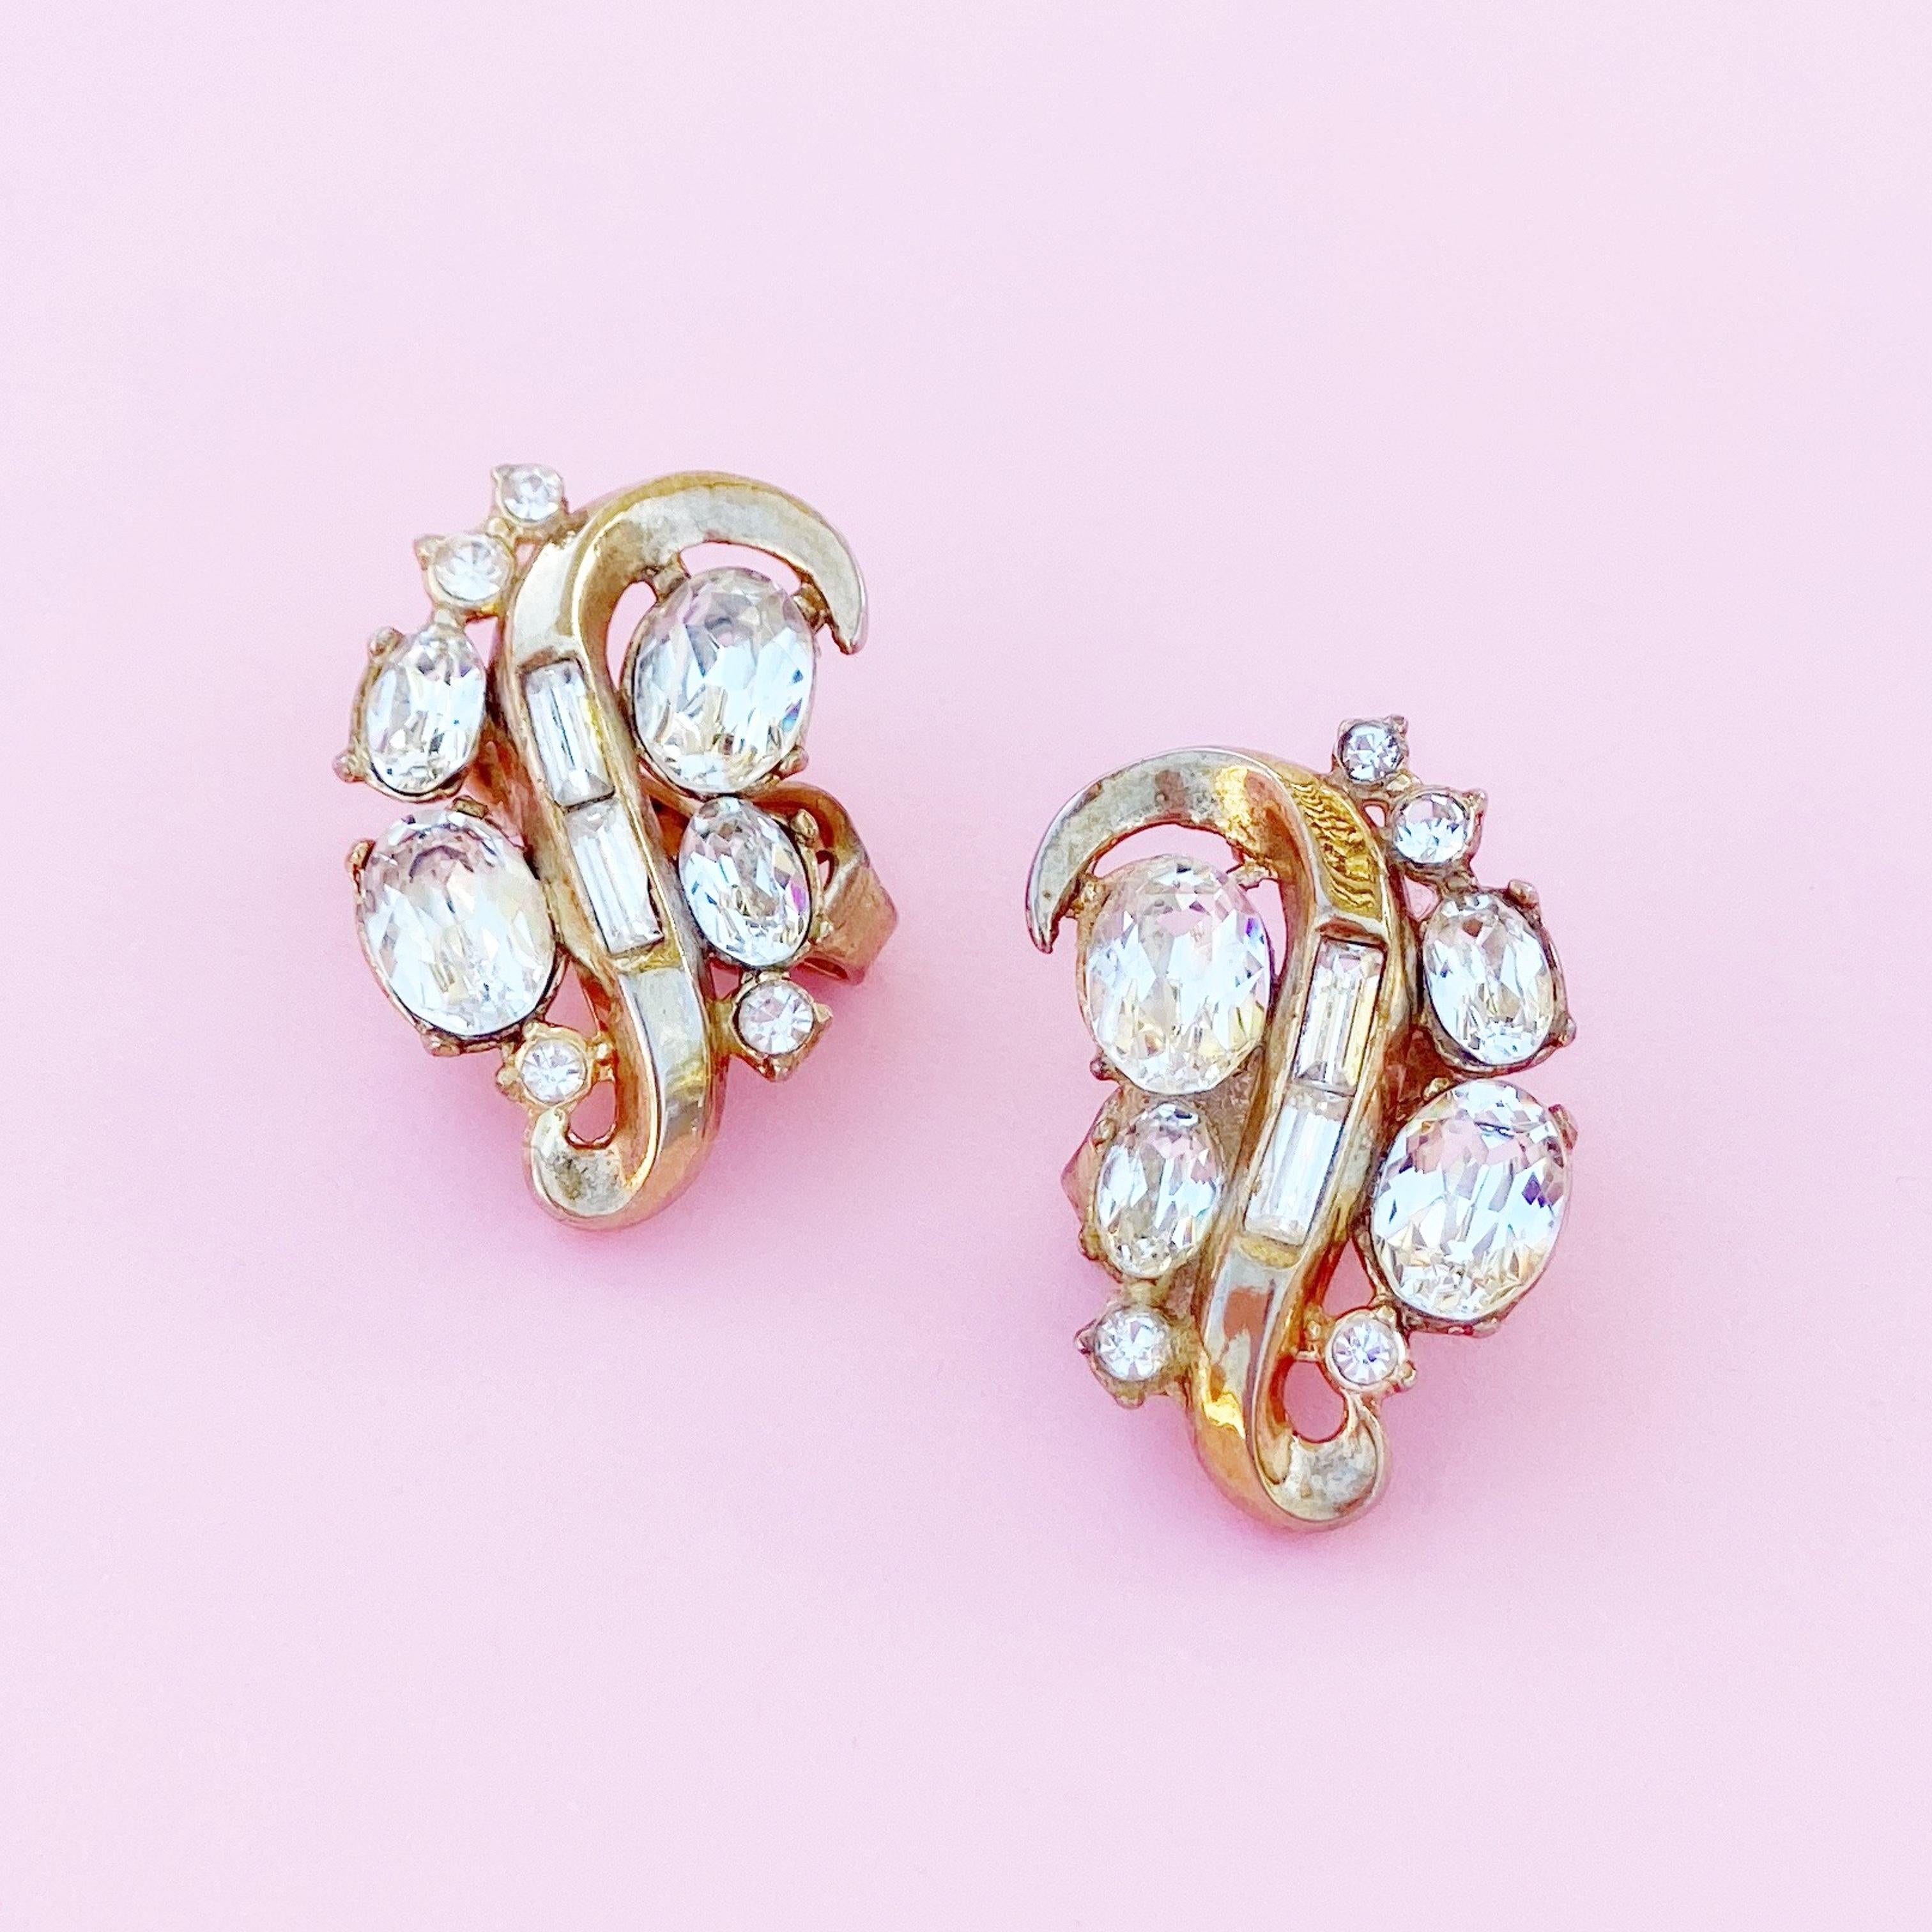 Modern Vintage Gilded Swirl Cocktail Earrings With Crystals By Crown Trifari, 1950s